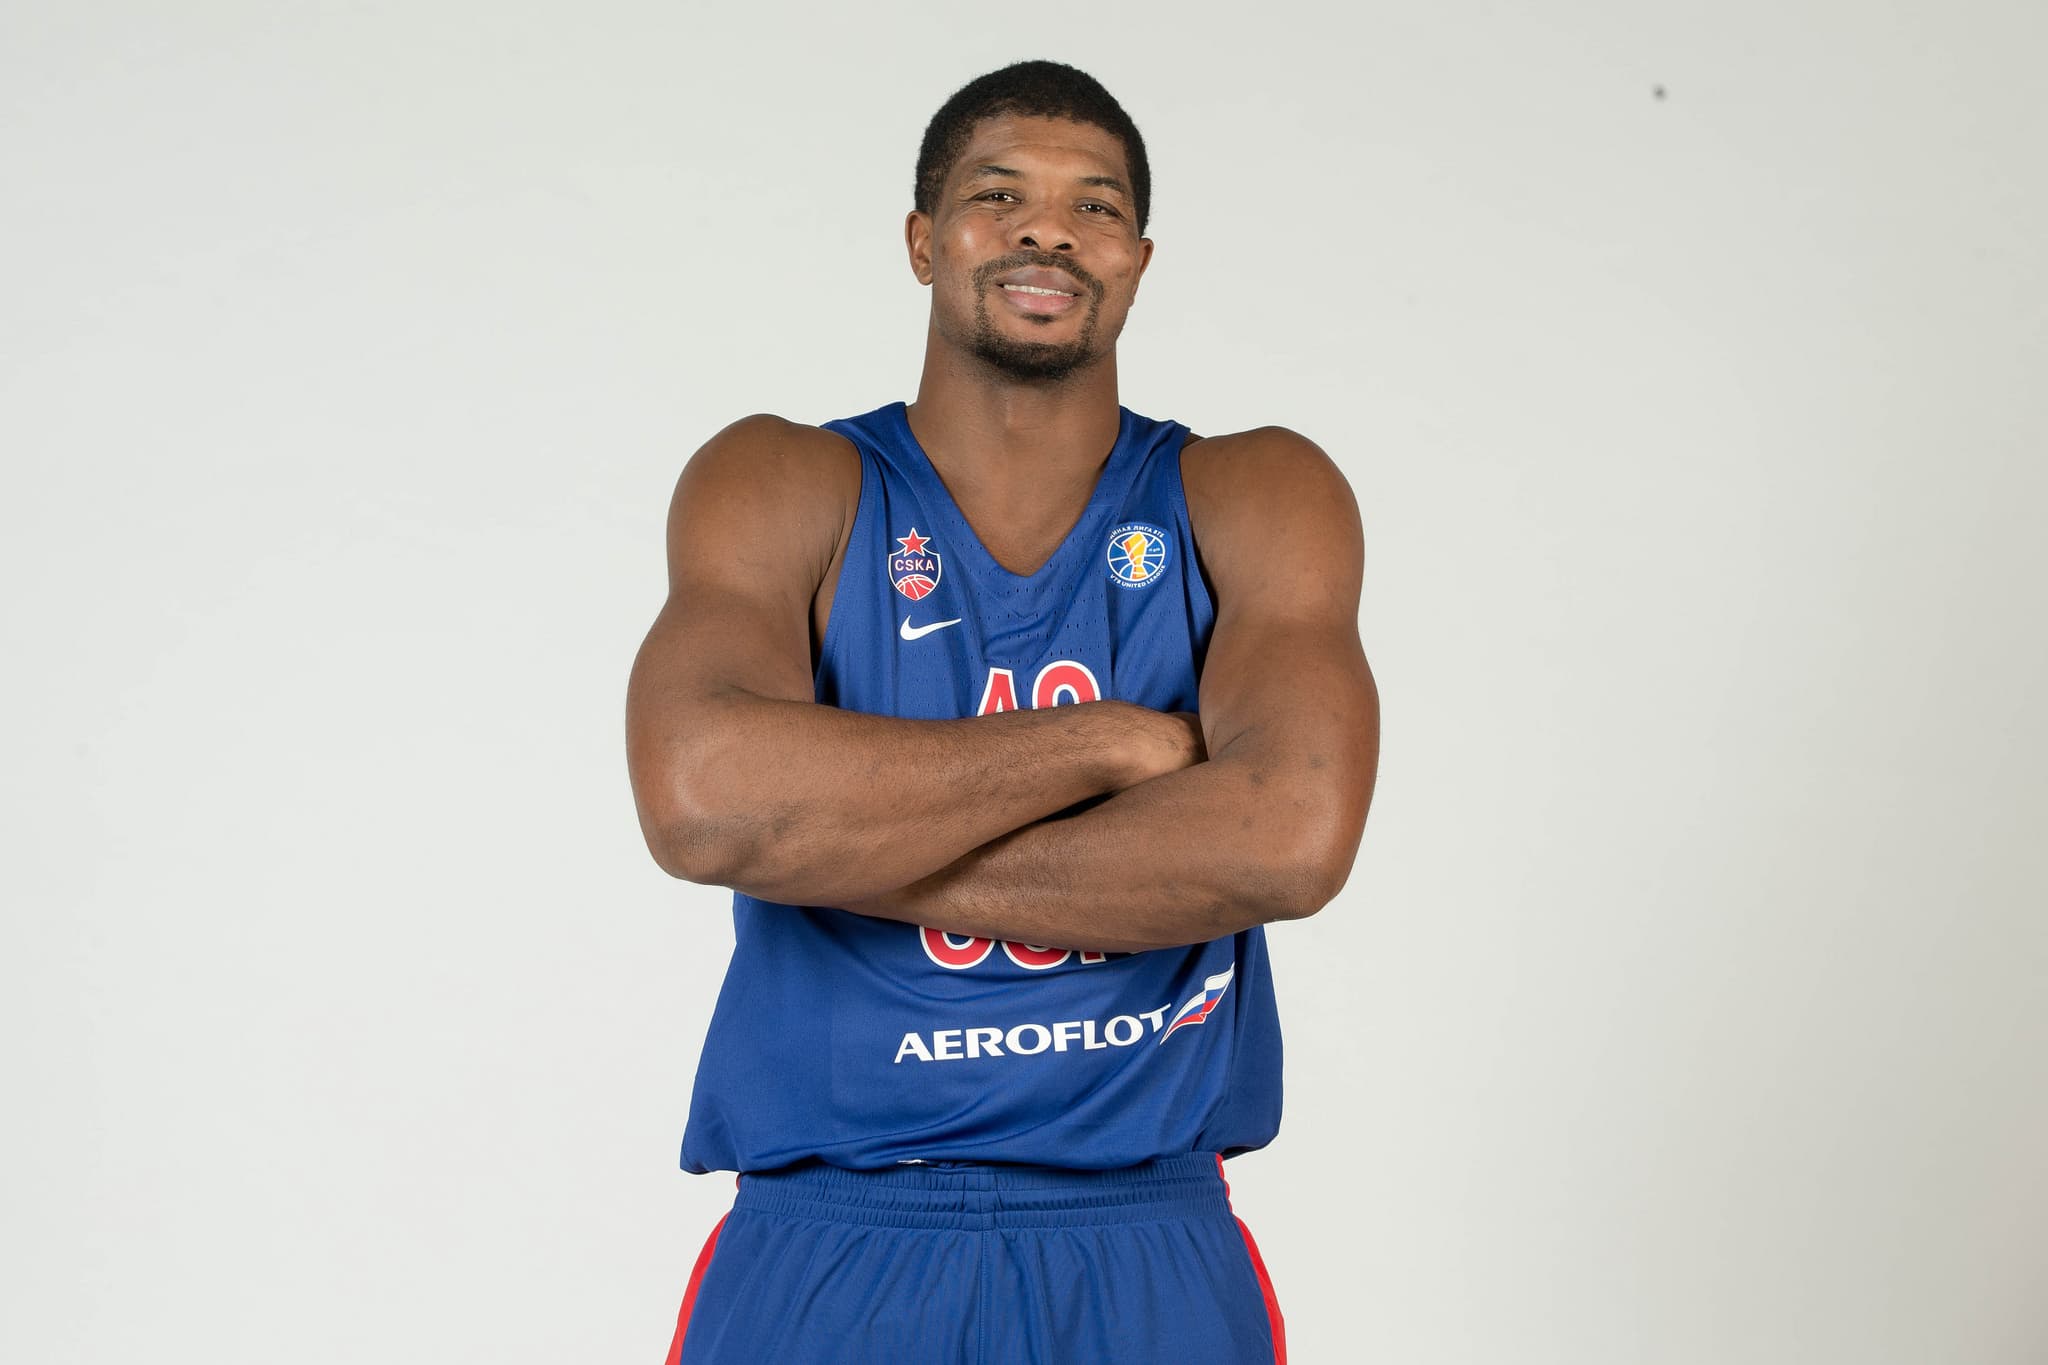 “Just A Kid From Sicklerville” – Kyle Hines Returns To Moscow For The New Season